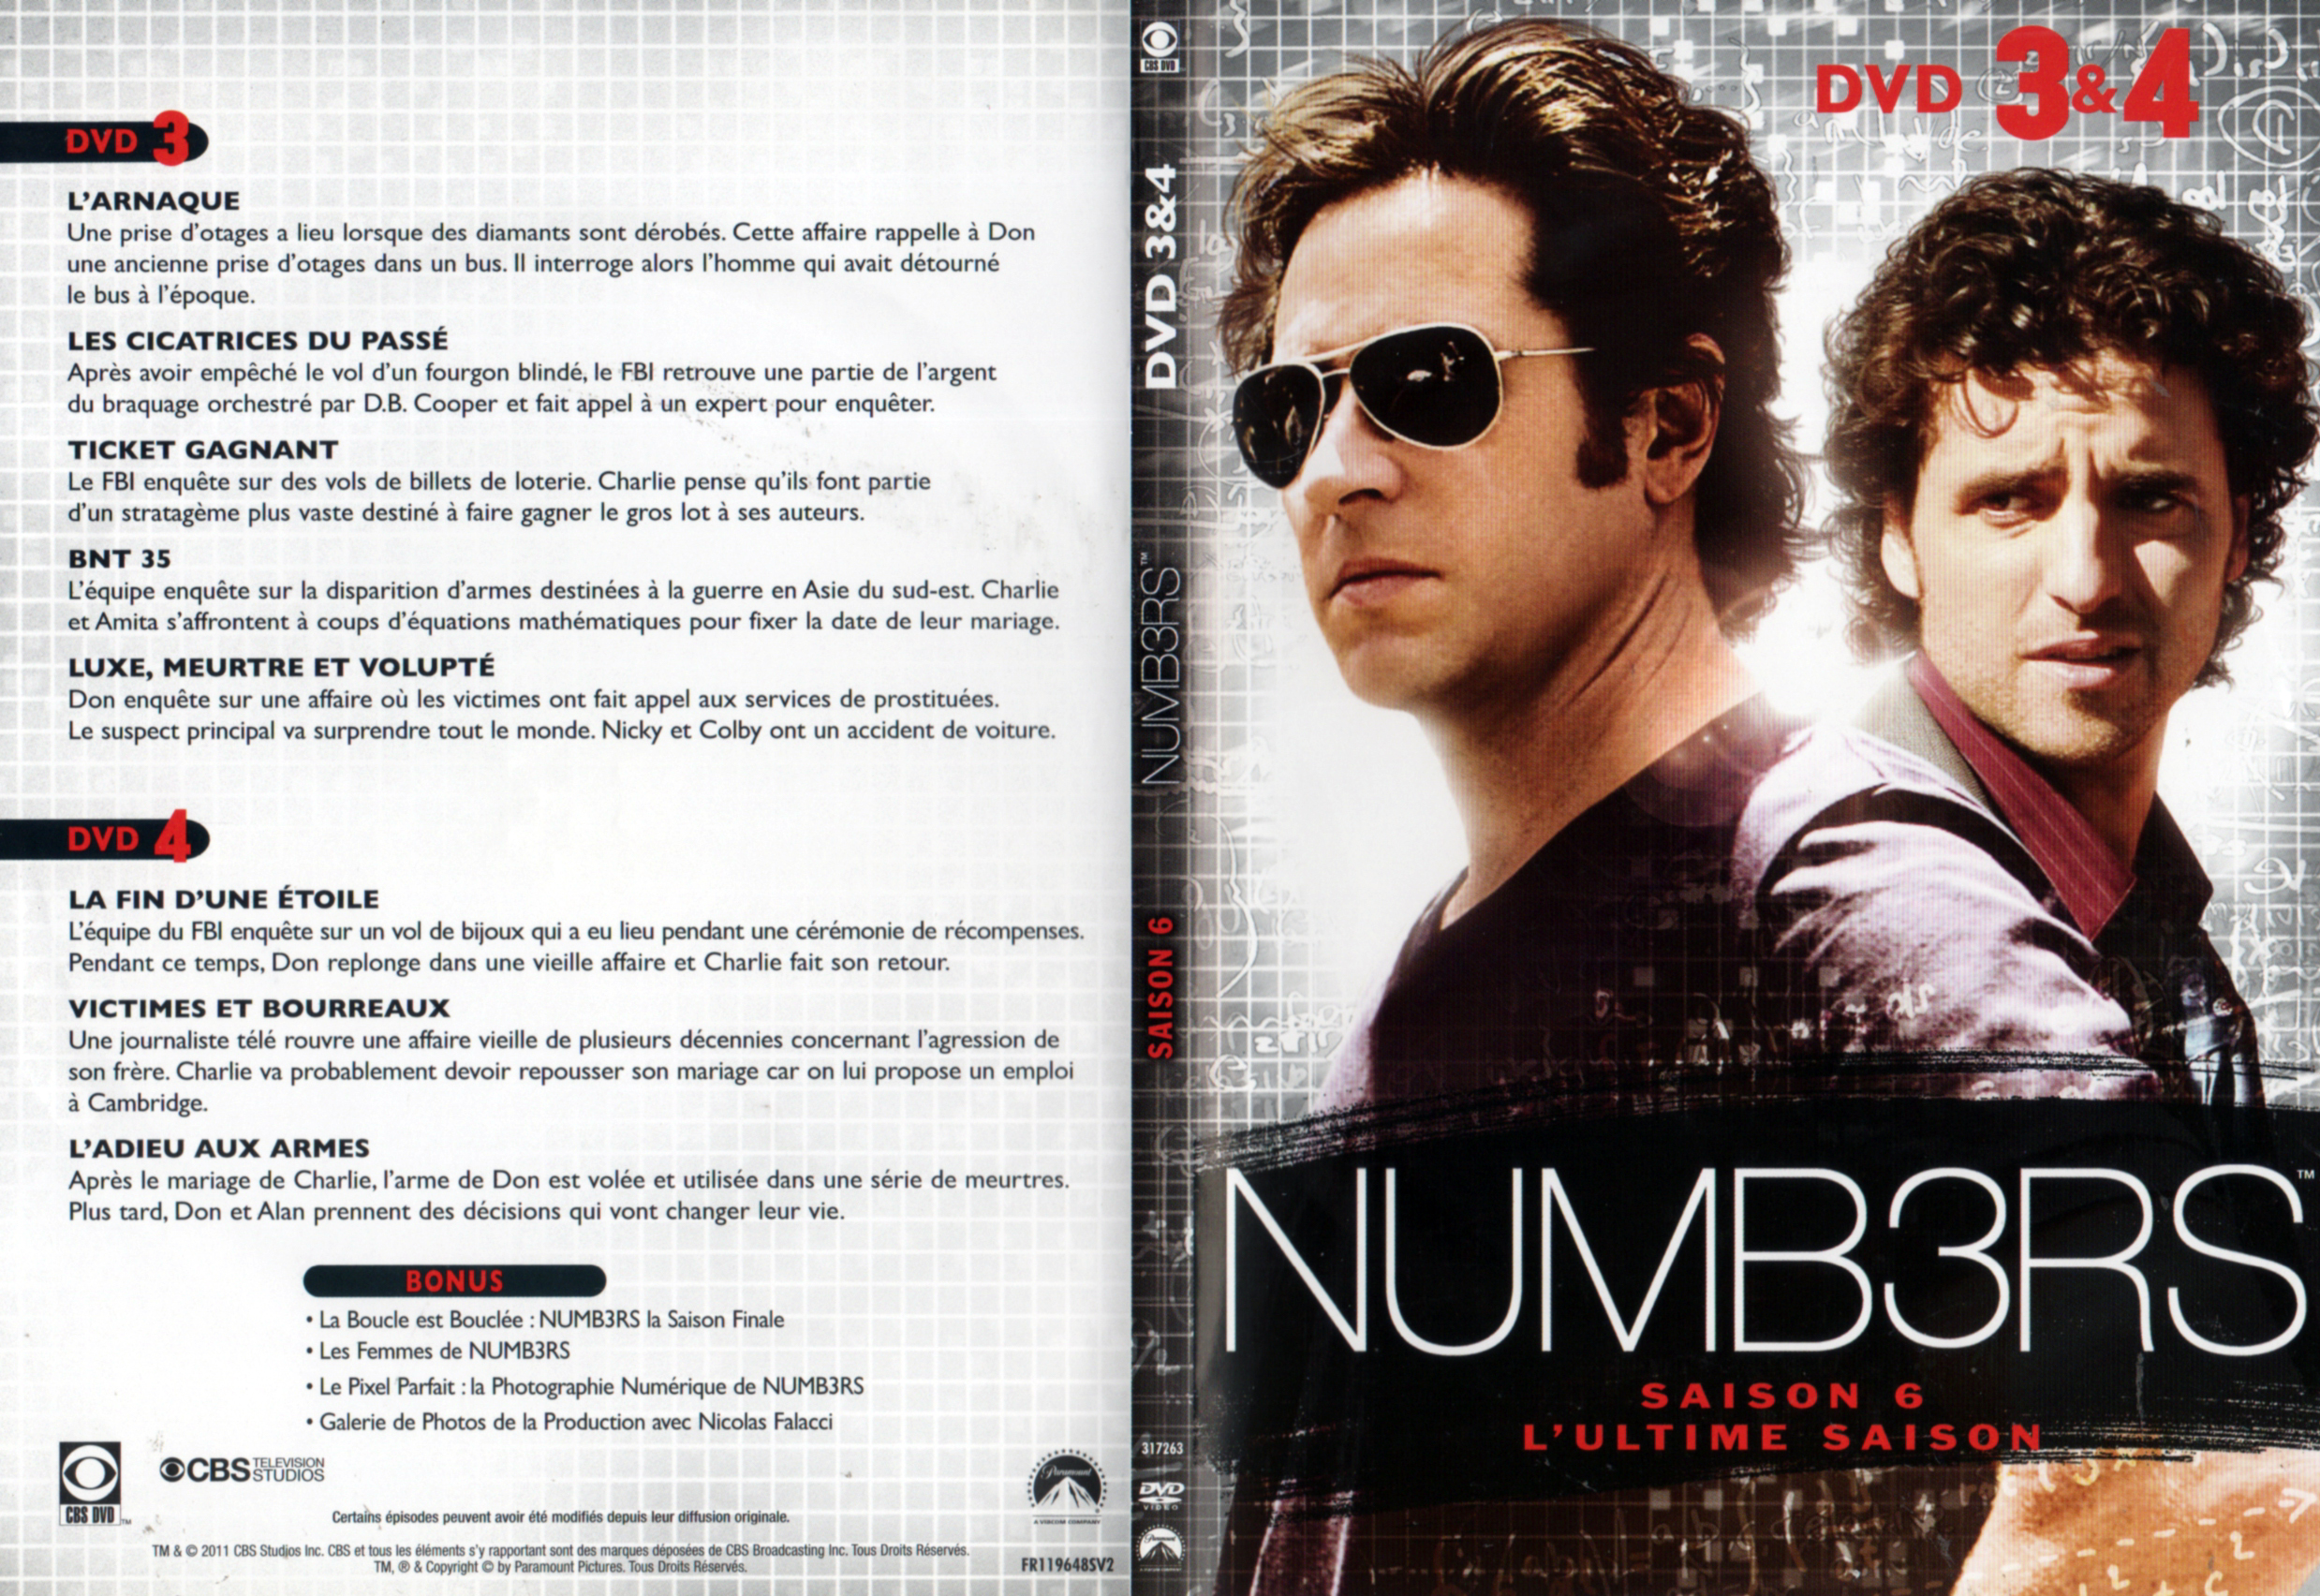 Jaquette DVD Numbers Saison 6 DVD 2